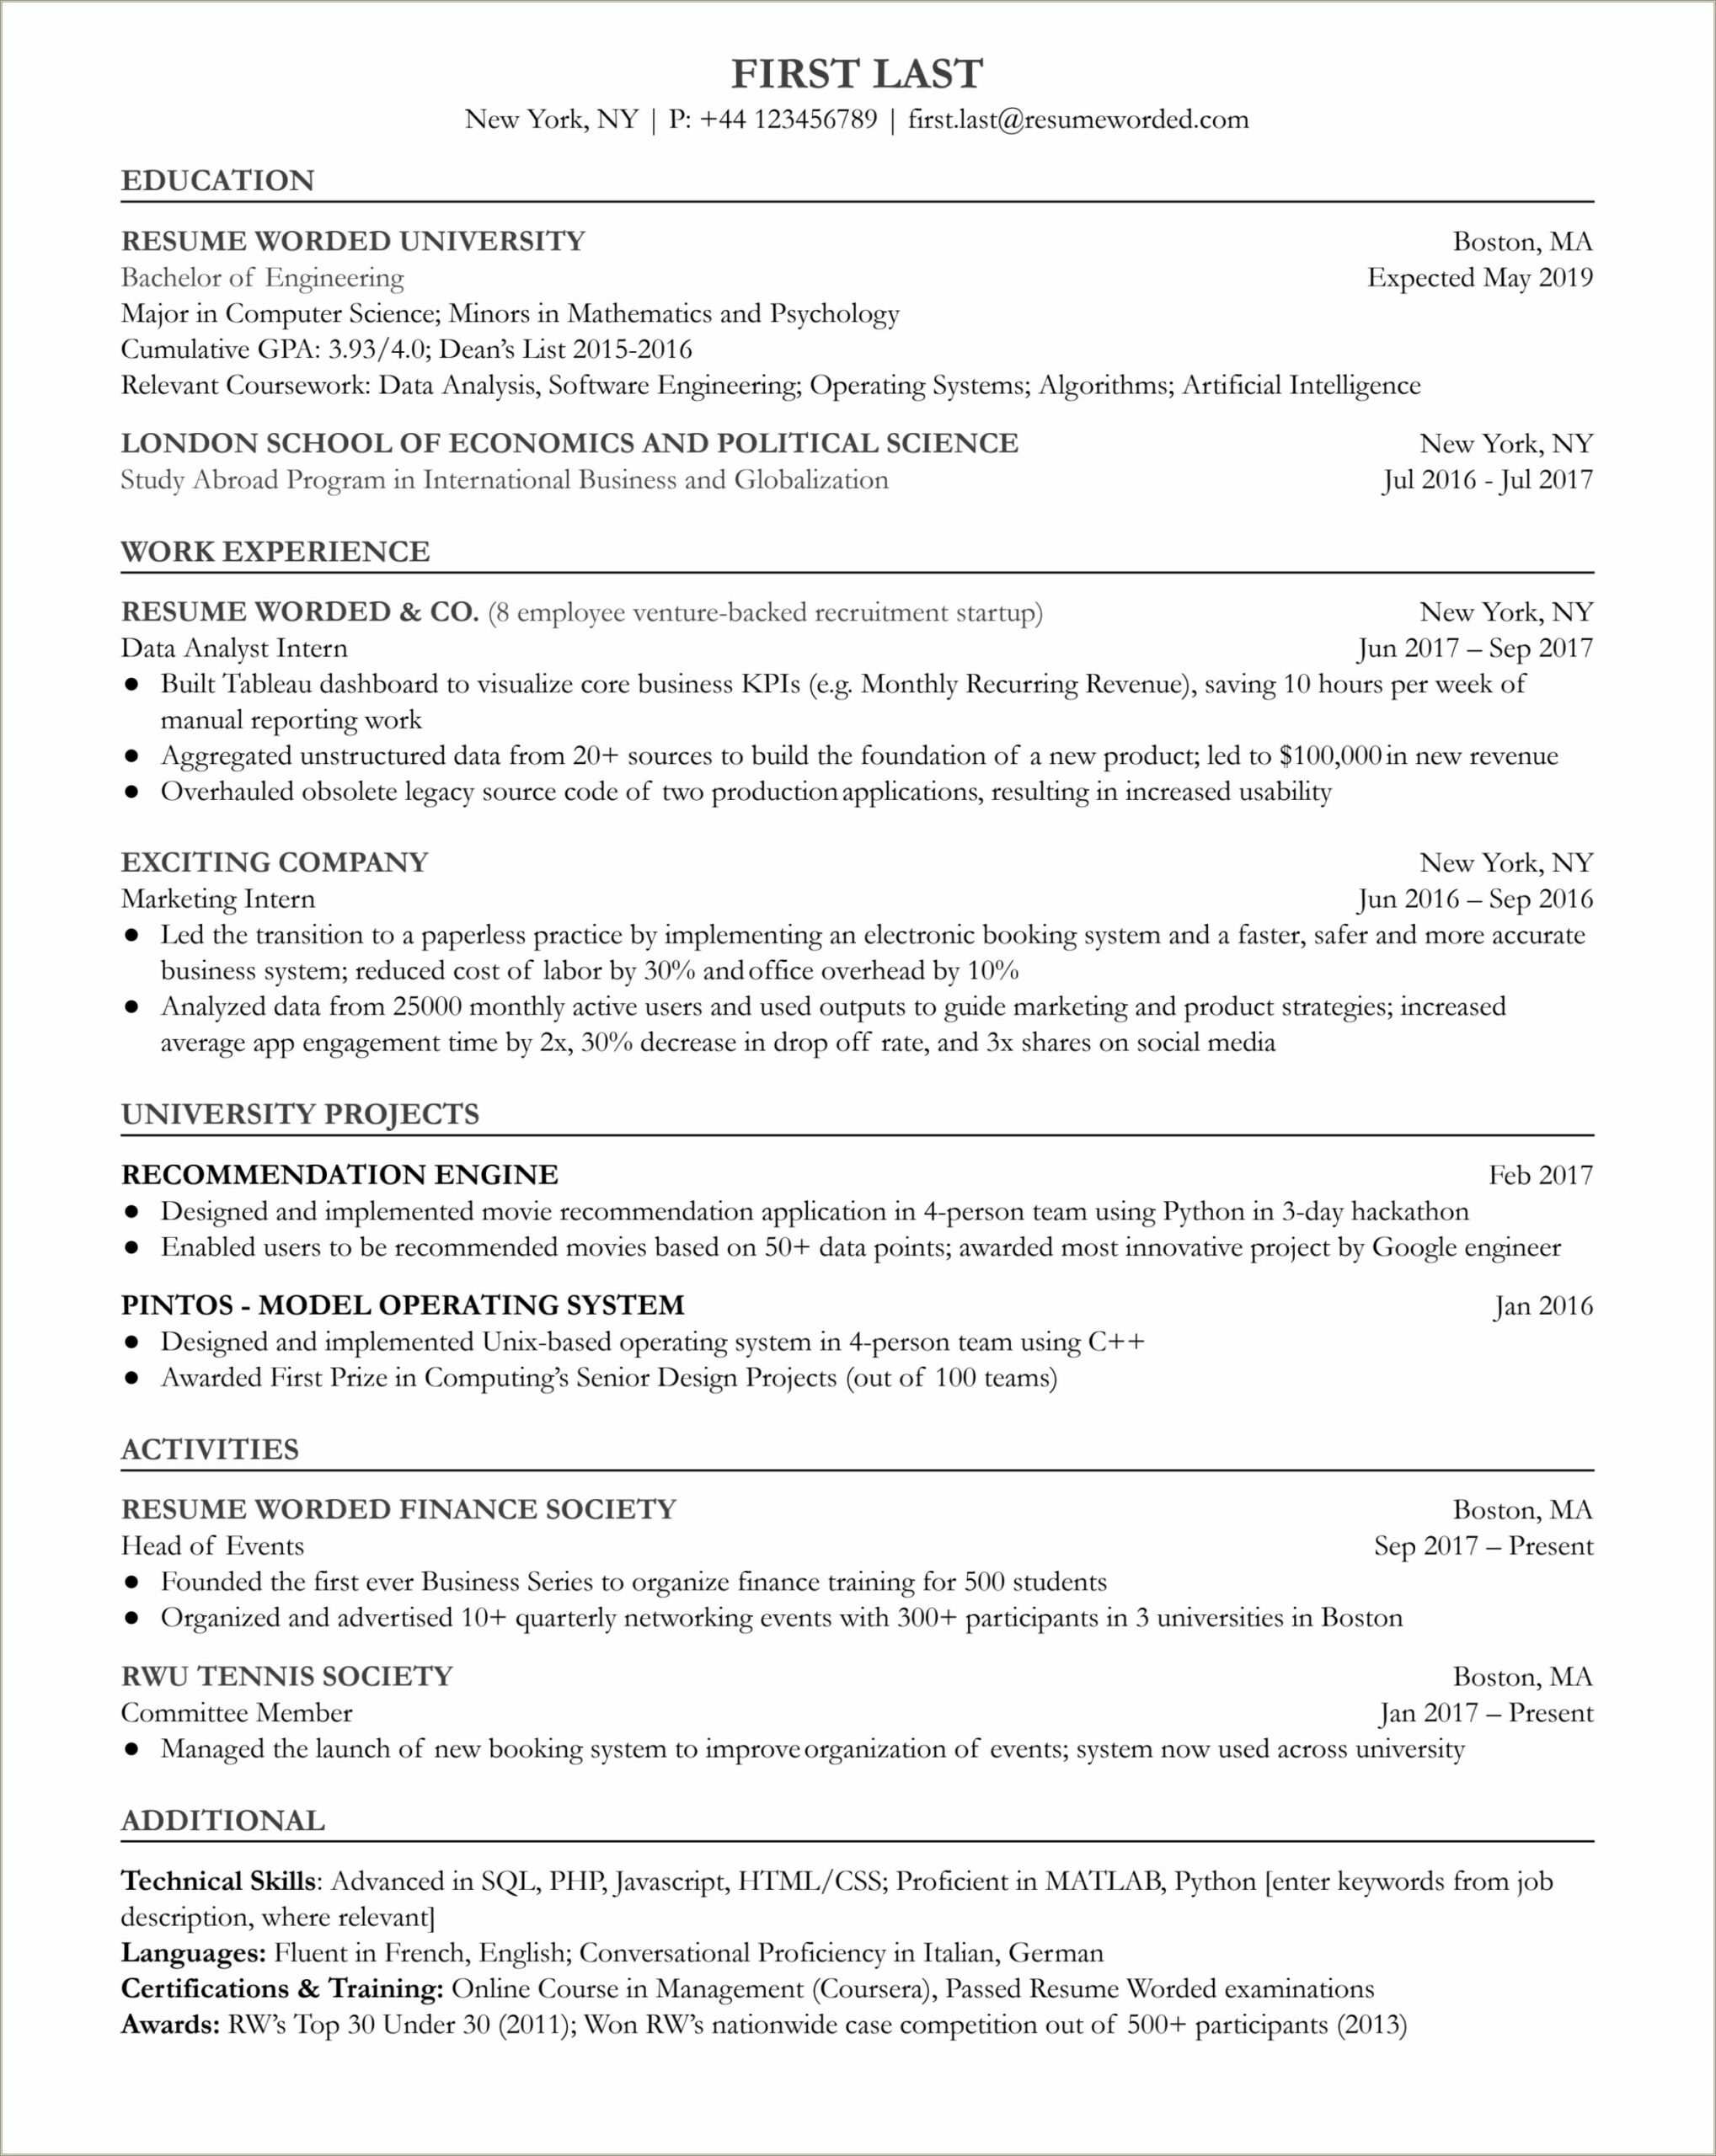 Sample Resume For Job Application Abroad